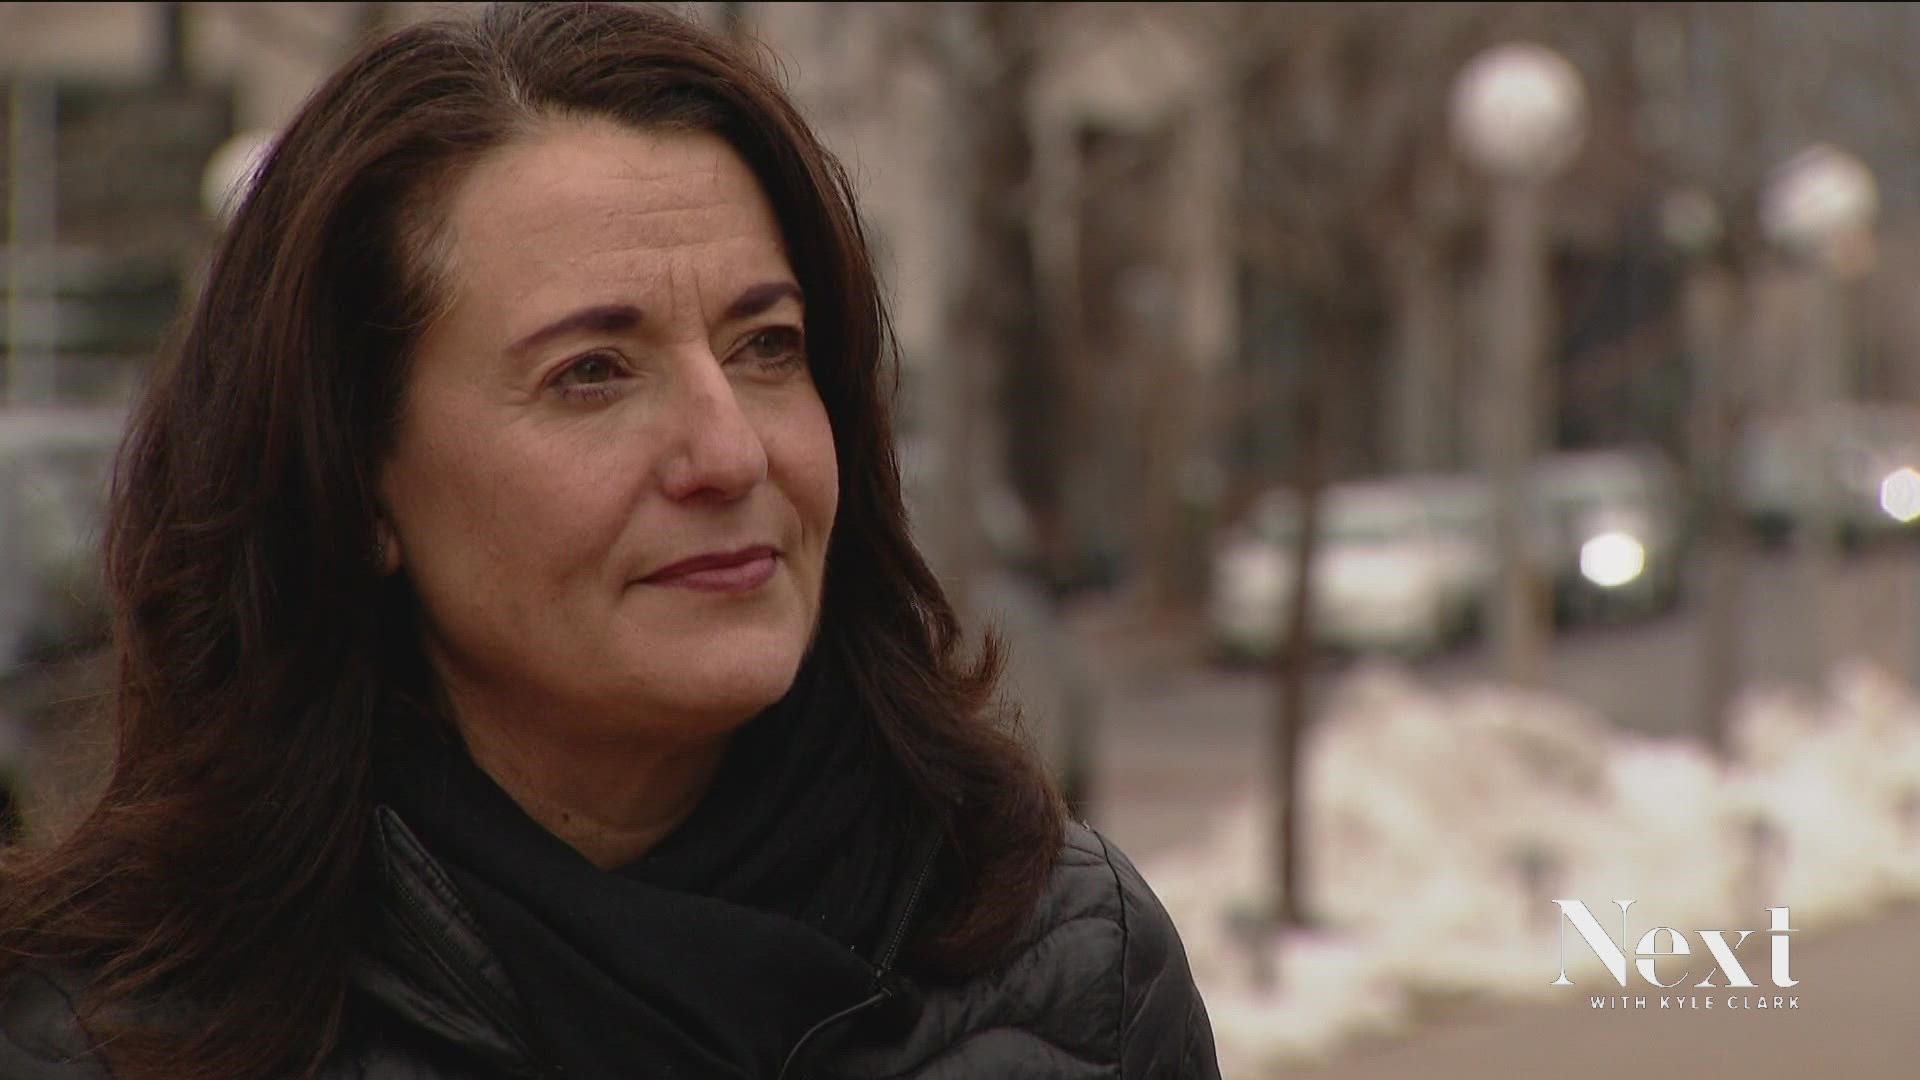 Denver mayoral candidate Kelly Brough is one of the city's more prominent names in the race. She talked police funding and homeless sweeps at an event today.